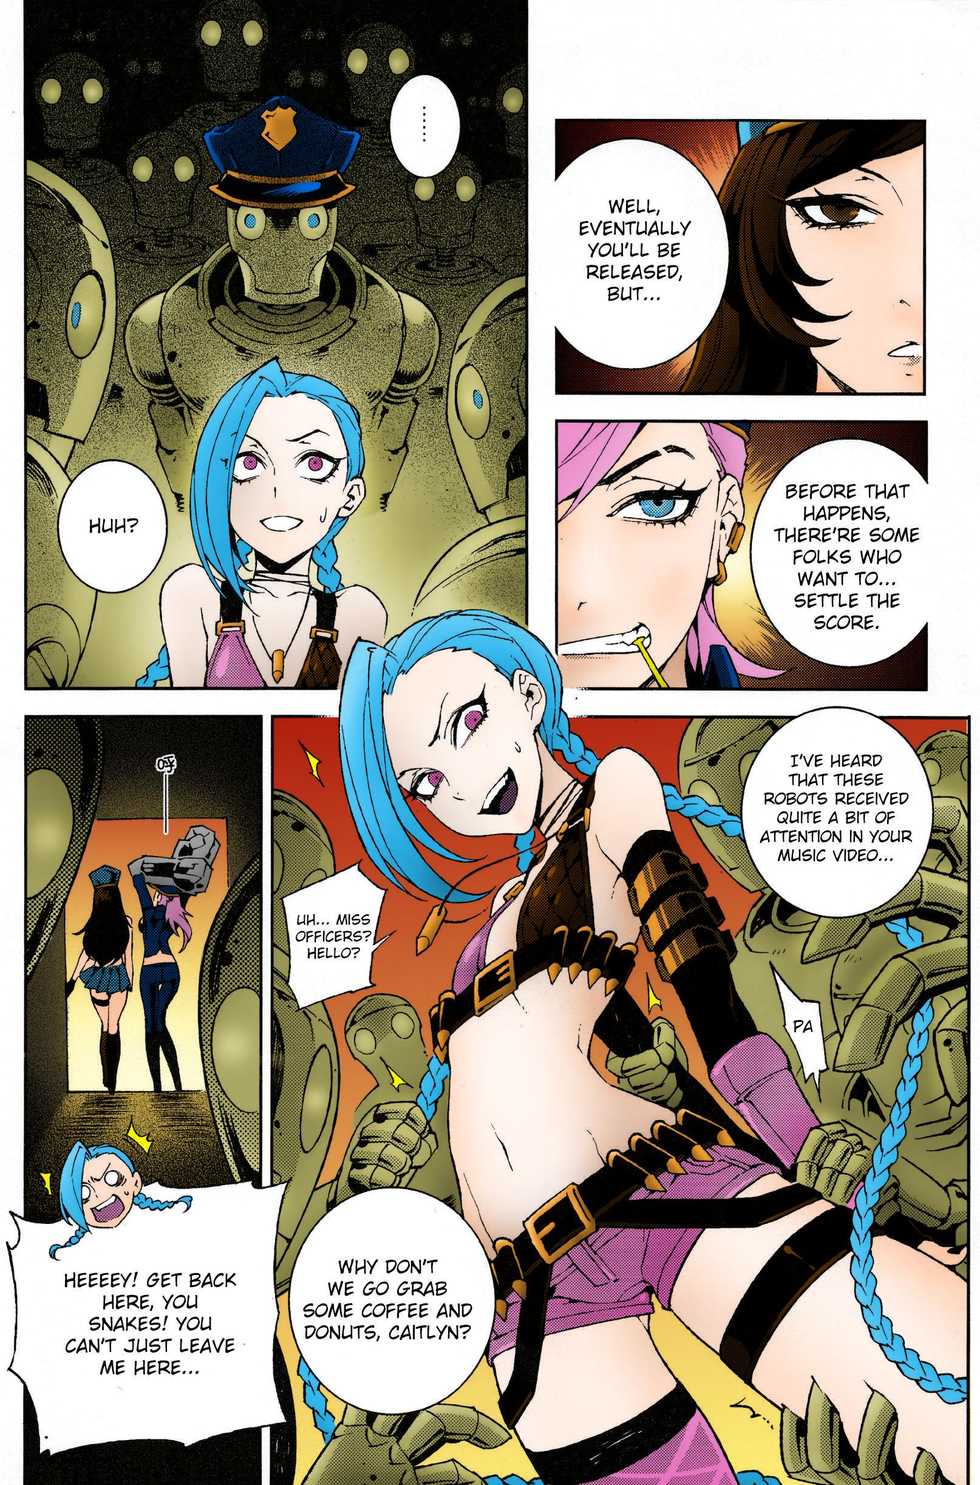 (FF23) [Turtle.Fish.Paint (Hirame Sensei)] JINX Come On! Shoot Faster (League of Legends) [English] [HerpaDerpMan] [Colorized] [Decensored] - Page 3